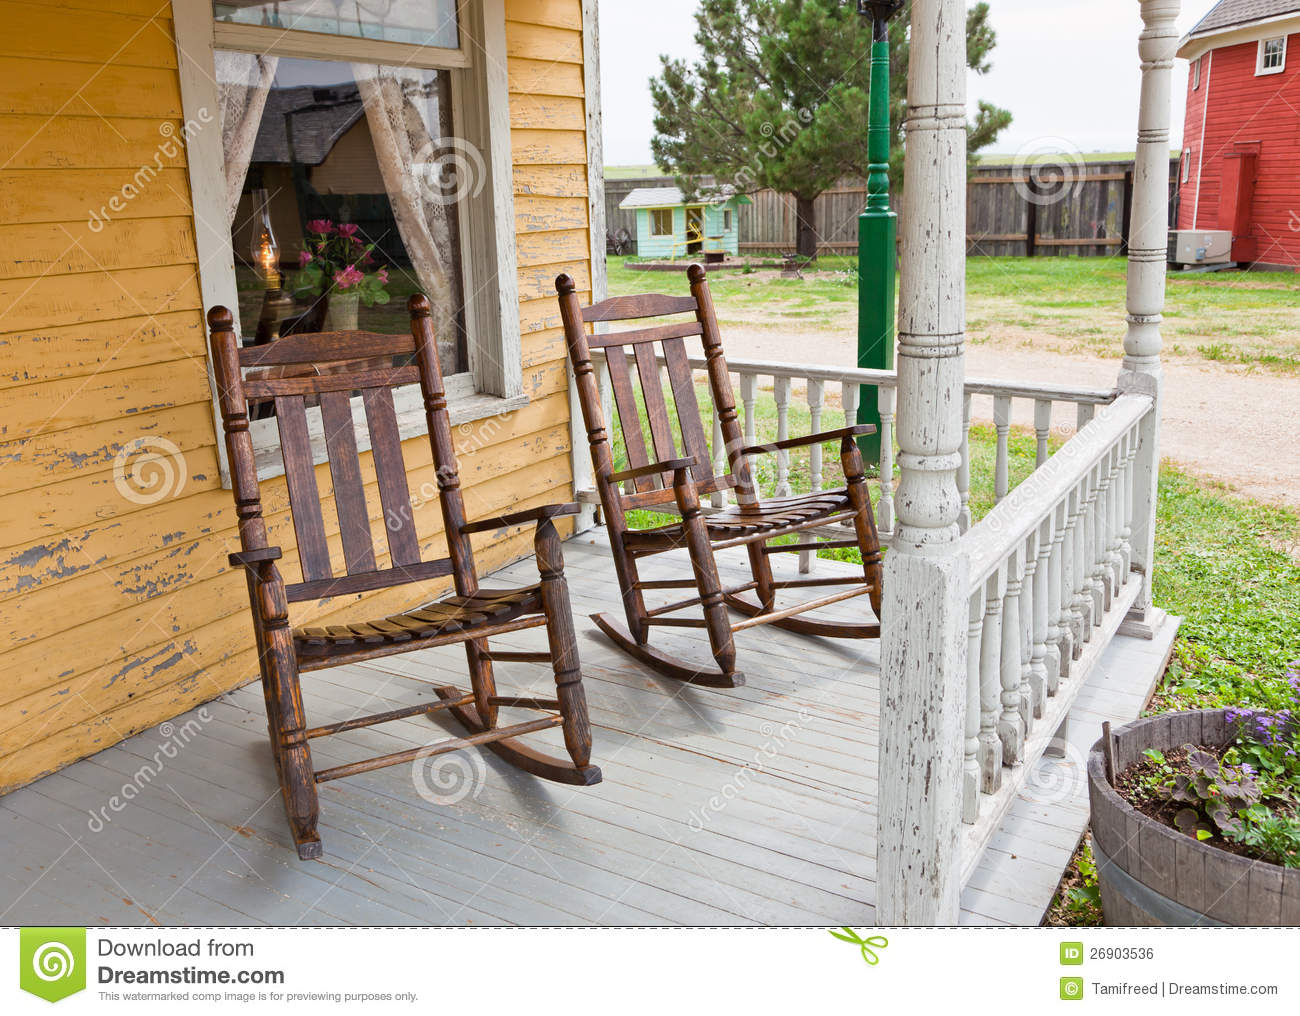 Front Porch Rocking Chairs Royalty Free Stock Image   Image  26903536